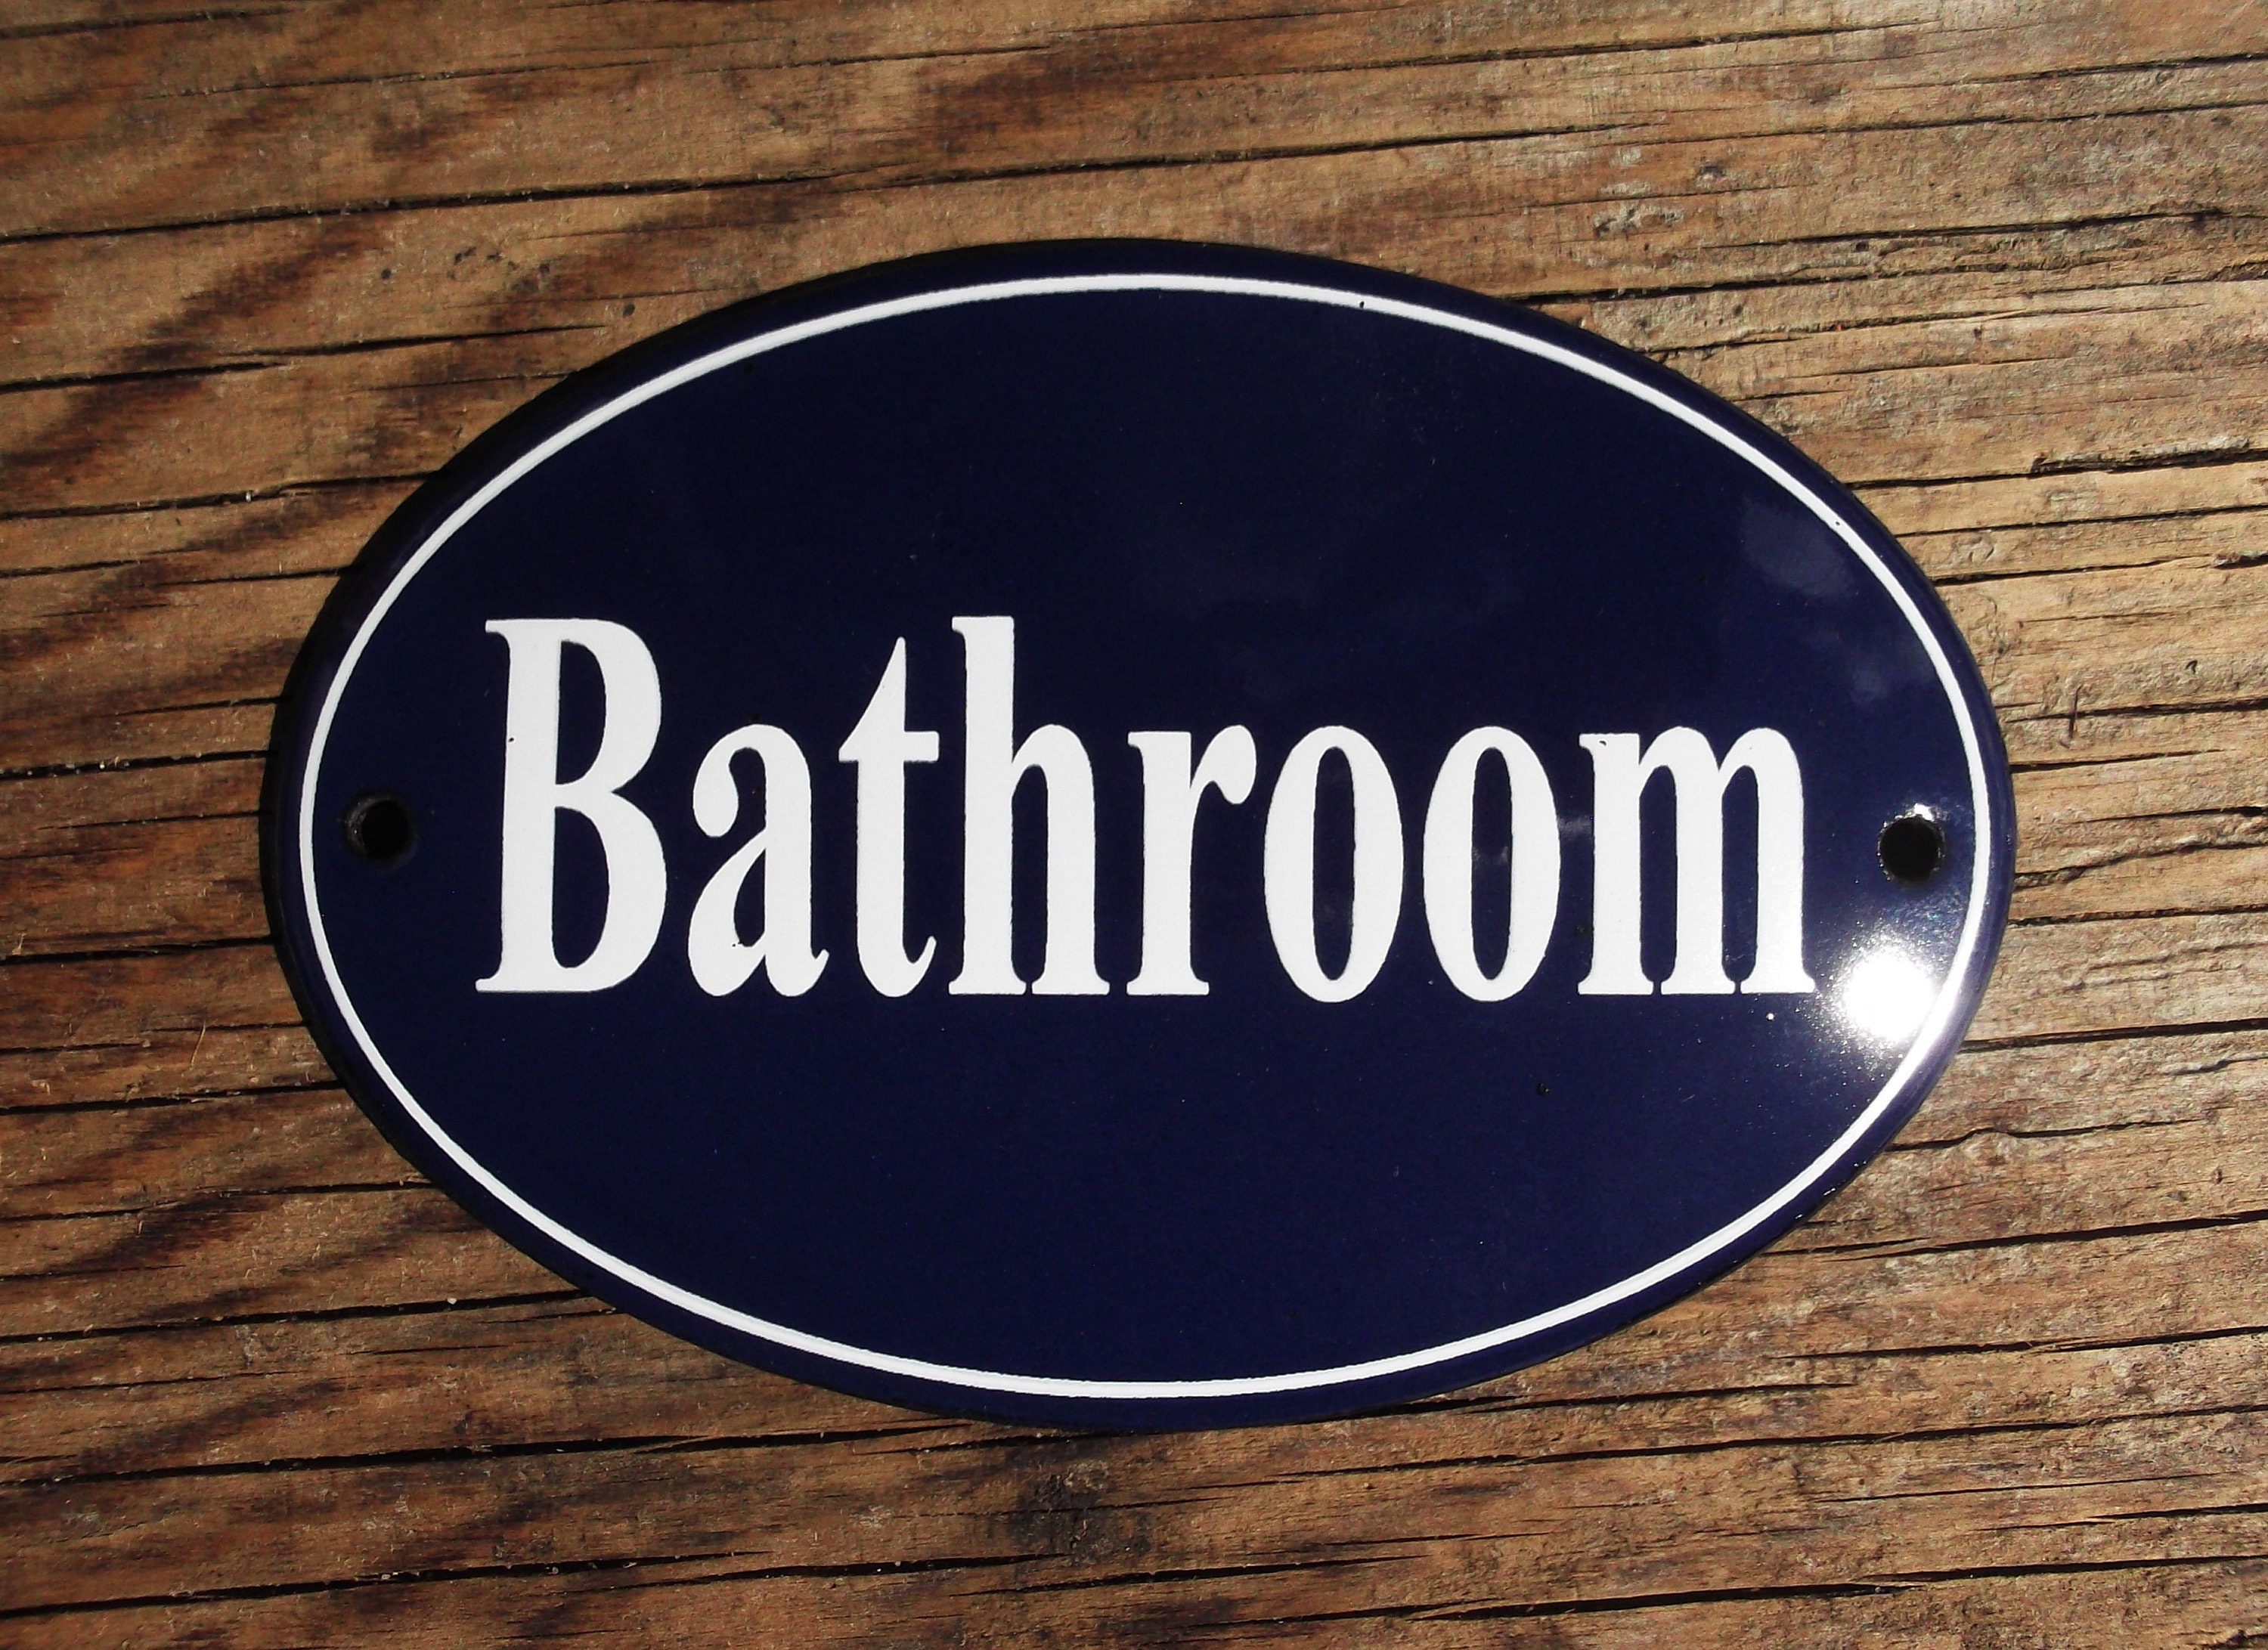 Classic Enamel WC bathroom sign 10x5cm. White text on a blue background